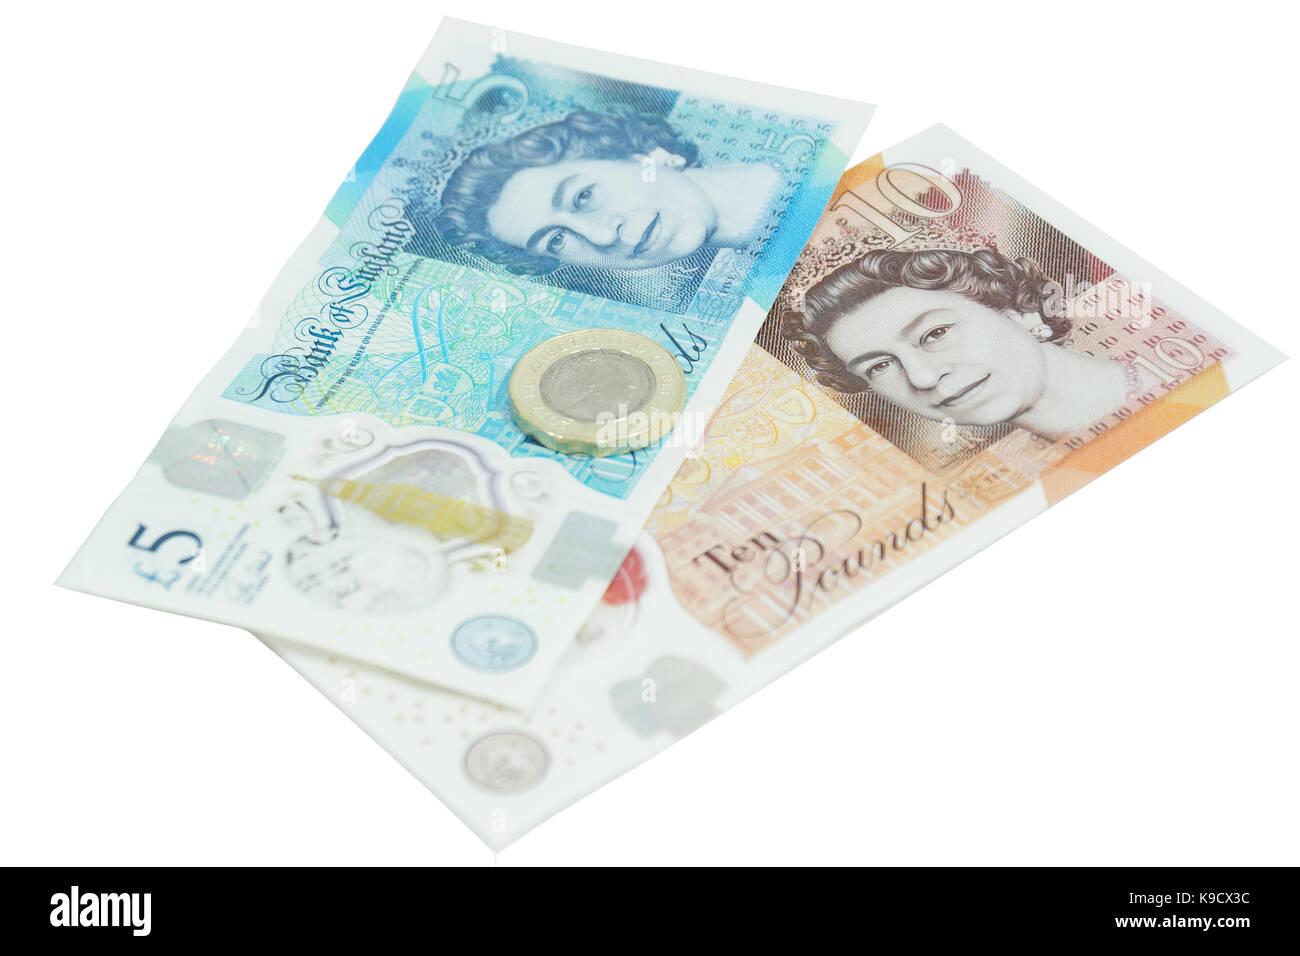 The newly introduced currency of the United Kingdom - The polymer ten pound (£10) note Stock Photo